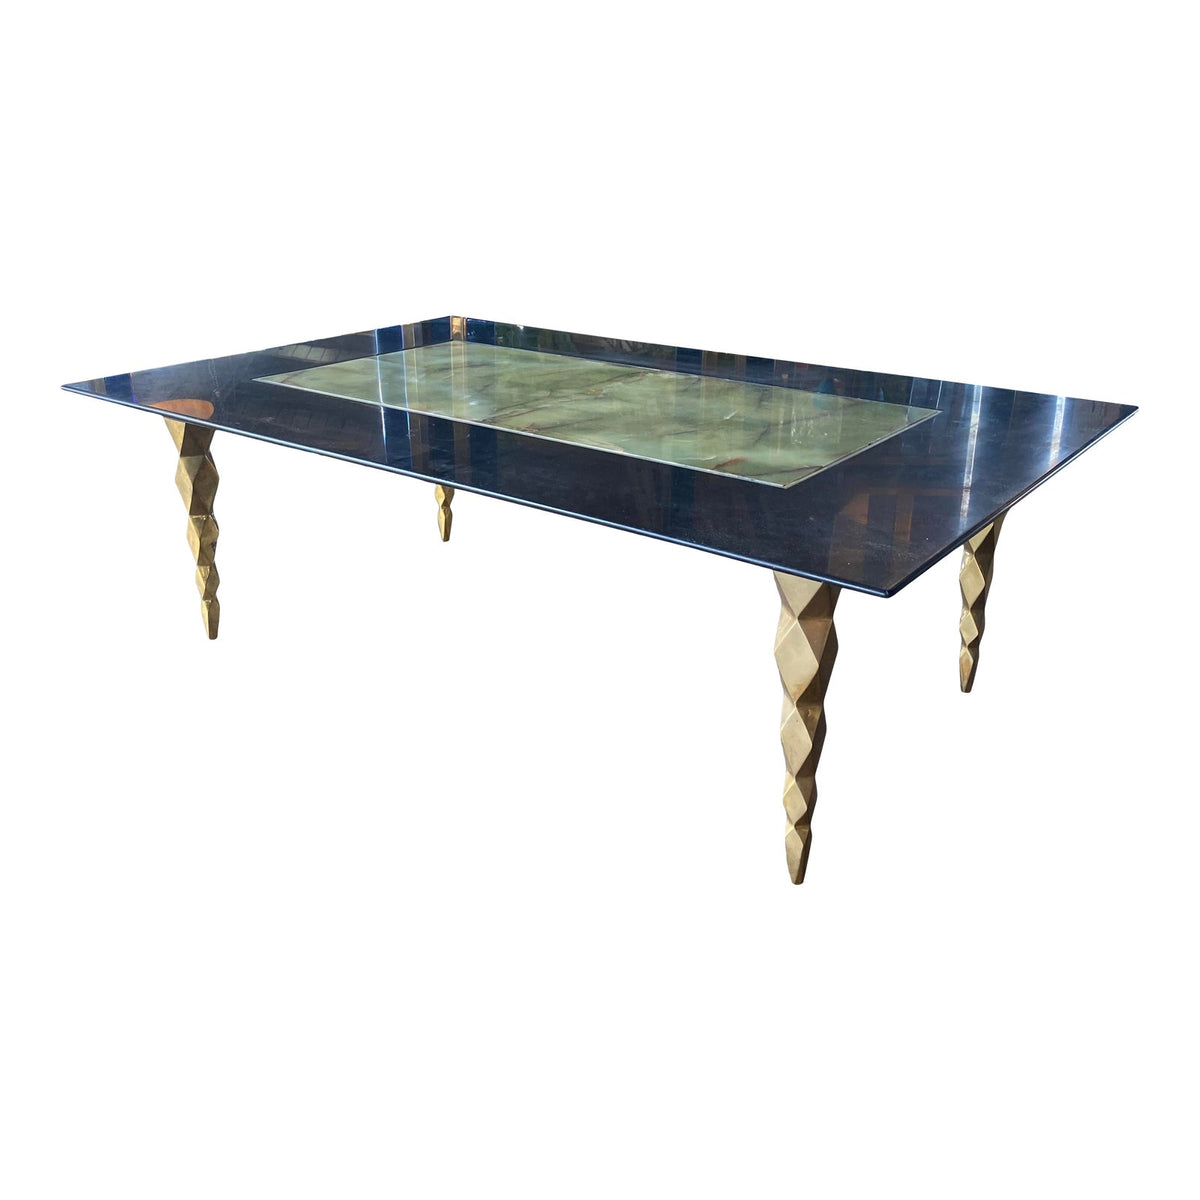 Marble Coffee Table Round Unique Table Design Round Beautiful Modern Small Table Design Luxury Cover  Bibi Russell